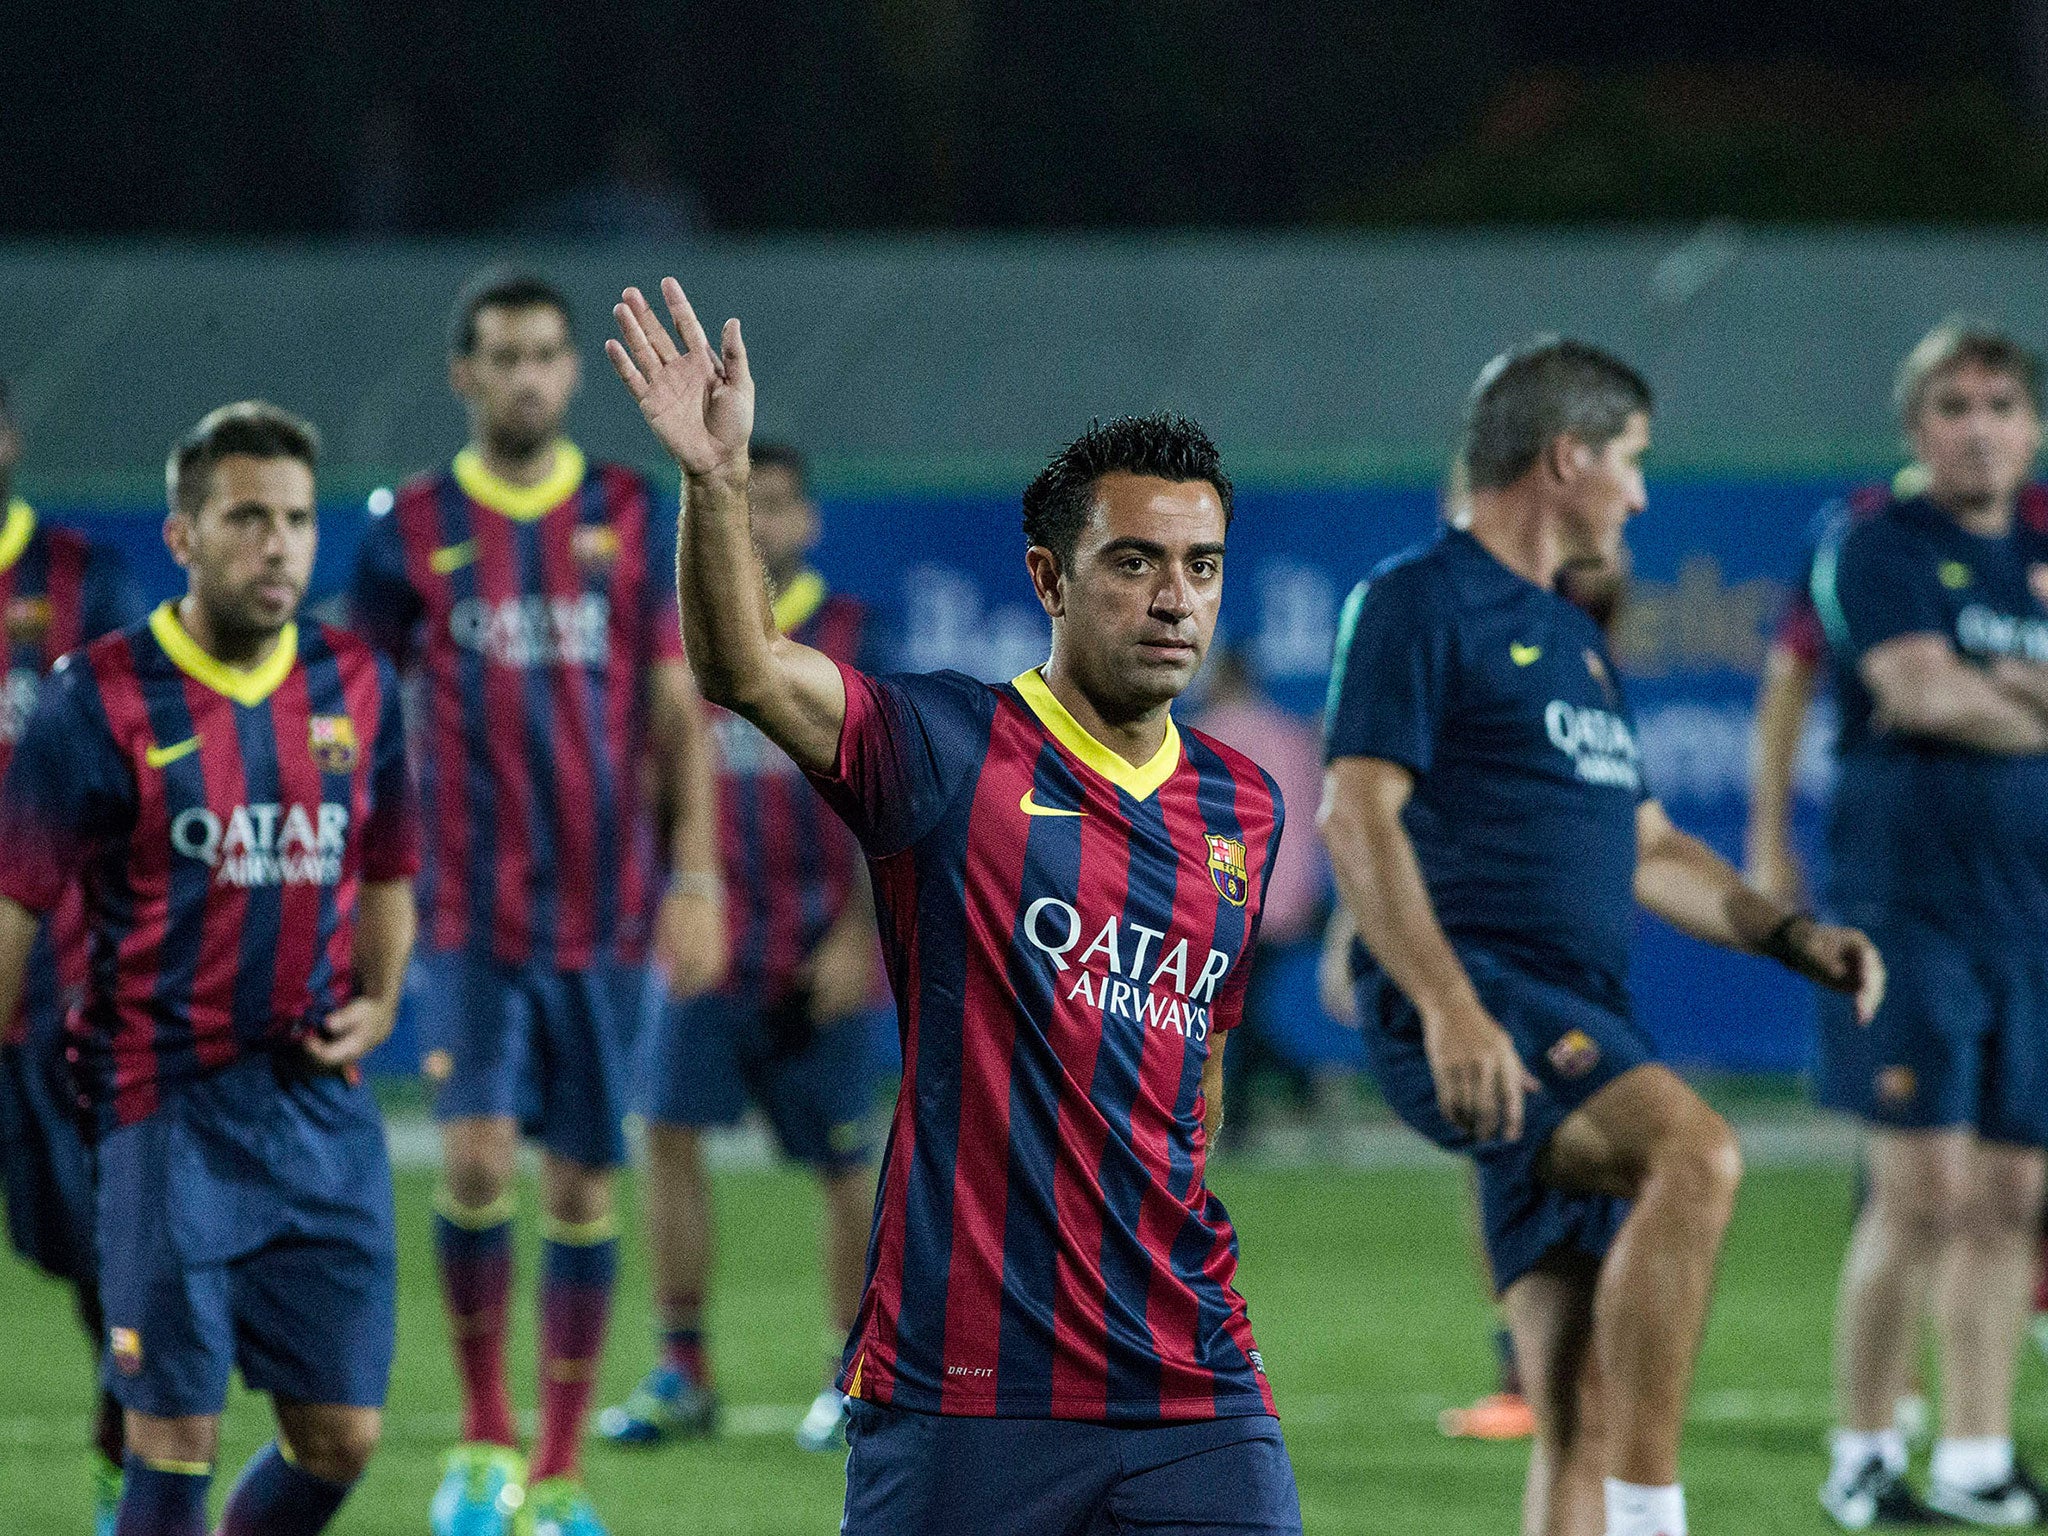 Saturday’s Champions League final will be Xavi Hernandez’s last game for Barça